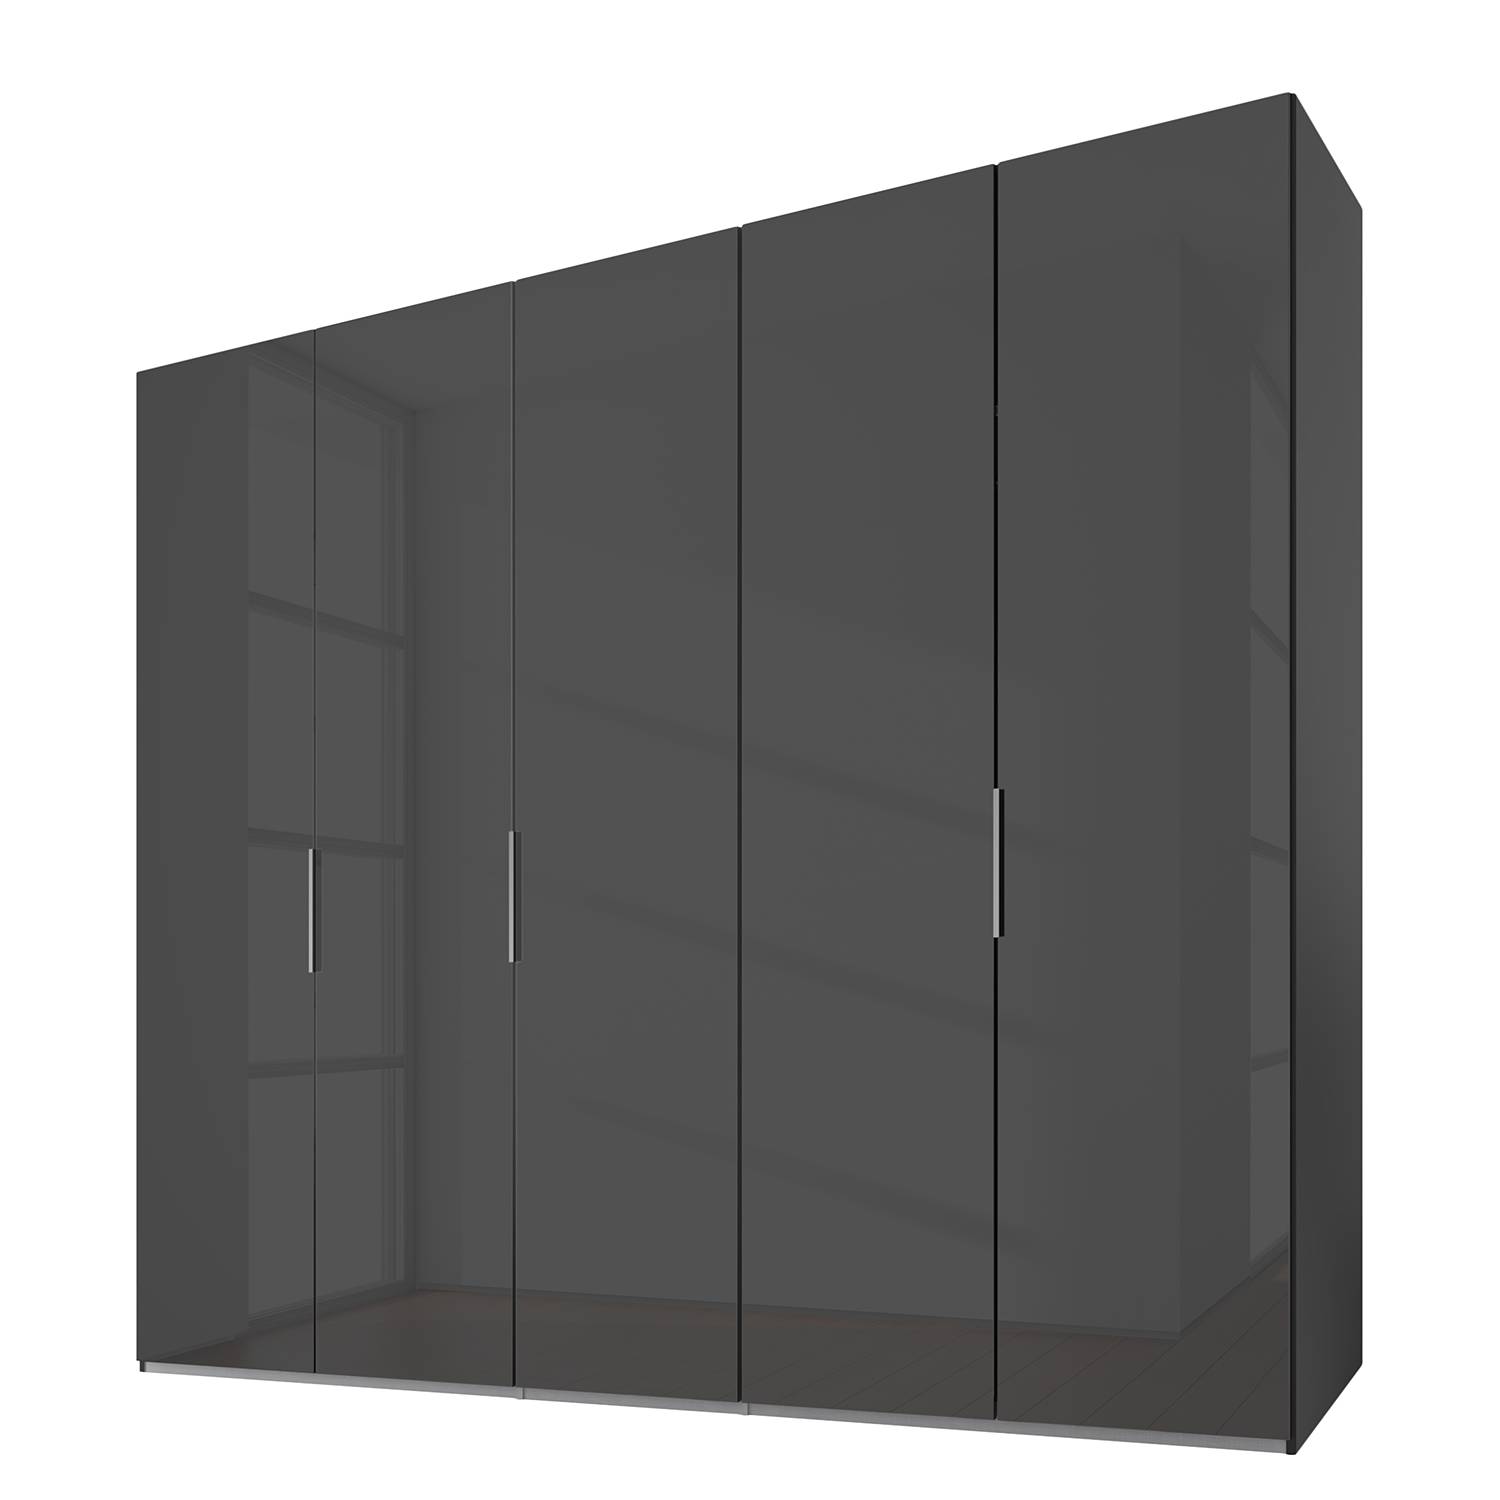 Image of Armoire One 210 000000001000224445